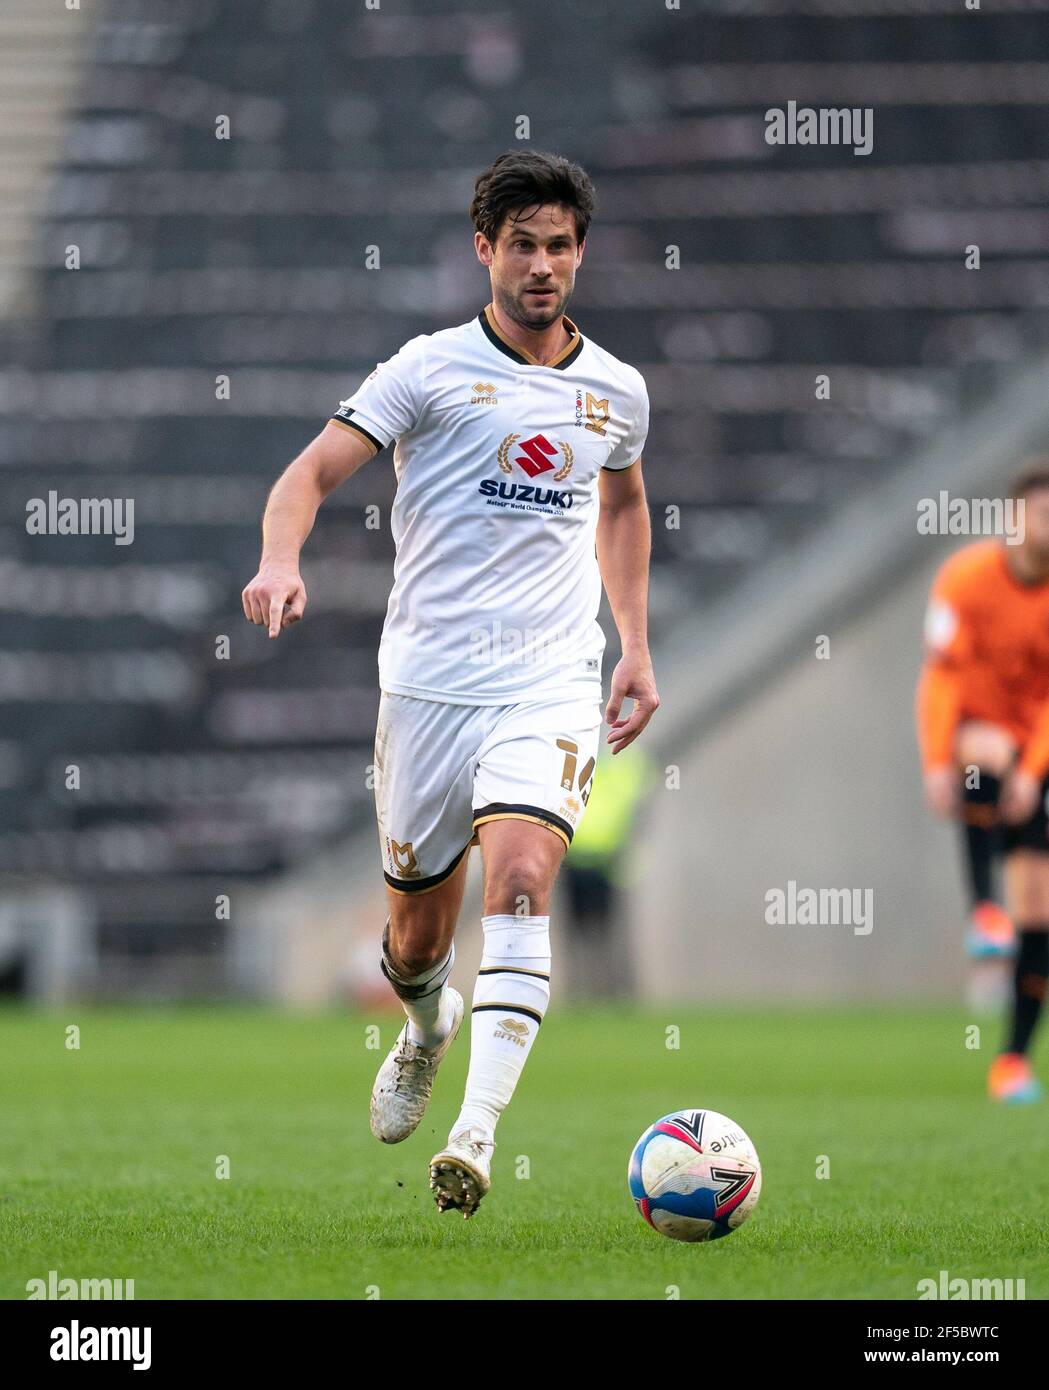 Goalscorer Andrew Surman of MK Dons during the Sky Bet League 1 behind closed doors match between MK Dons and Oxford United at stadium:mk, Milton Keyn Stock Photo